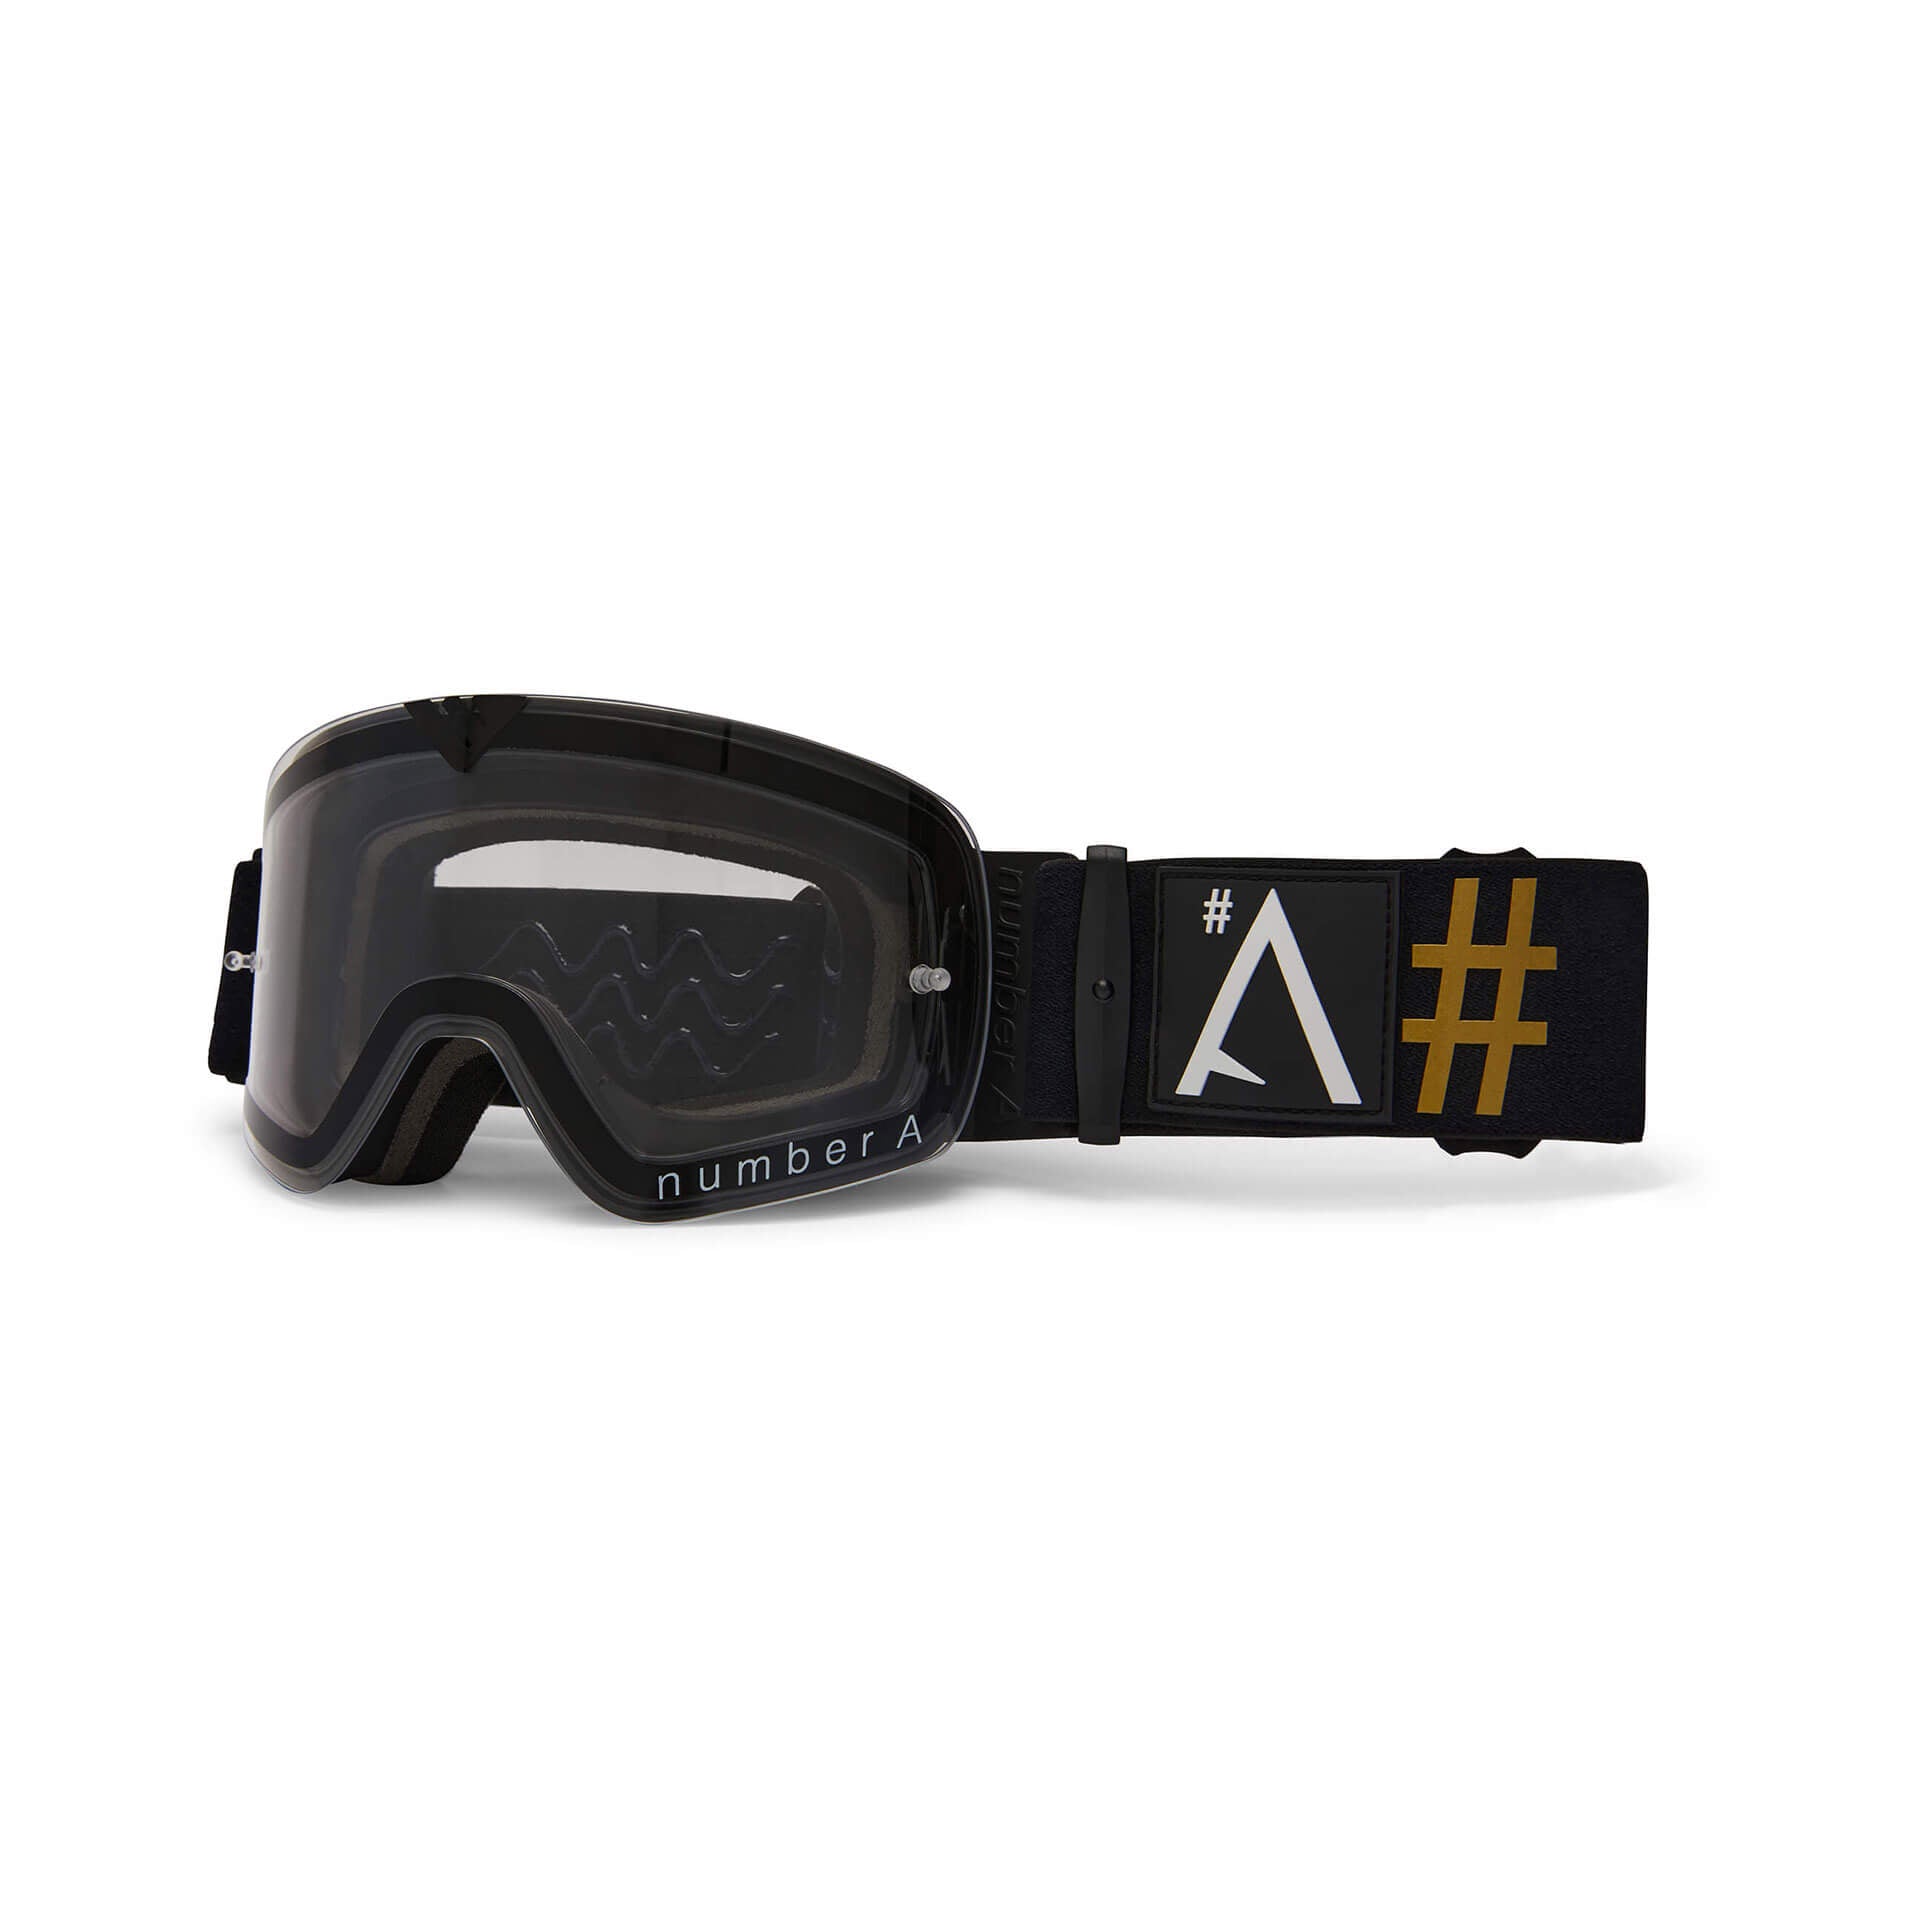 Number A Stato Goggles clear mirror lens black &amp; gold strap cycling eyewear mtb biking goggles